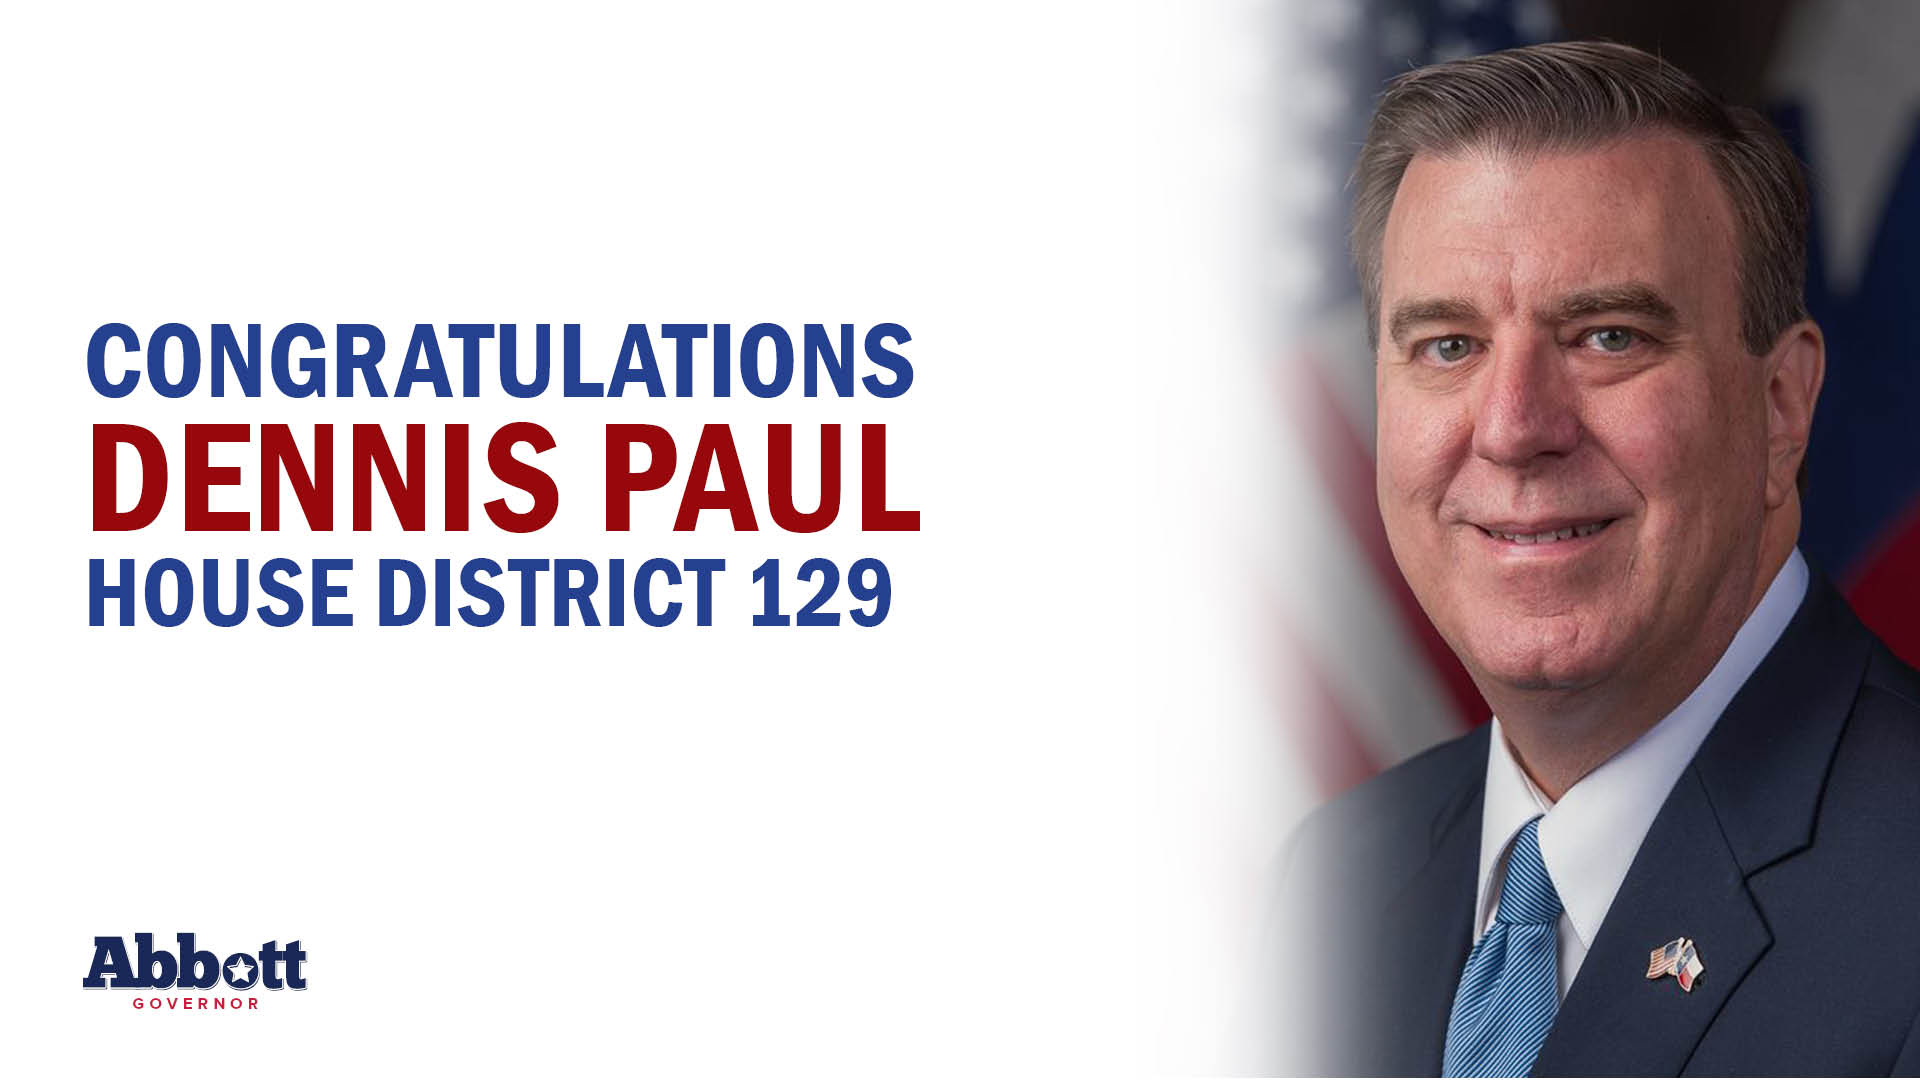 Governor Abbott Statement On Representative Dennis Paul’s Win In House District 129